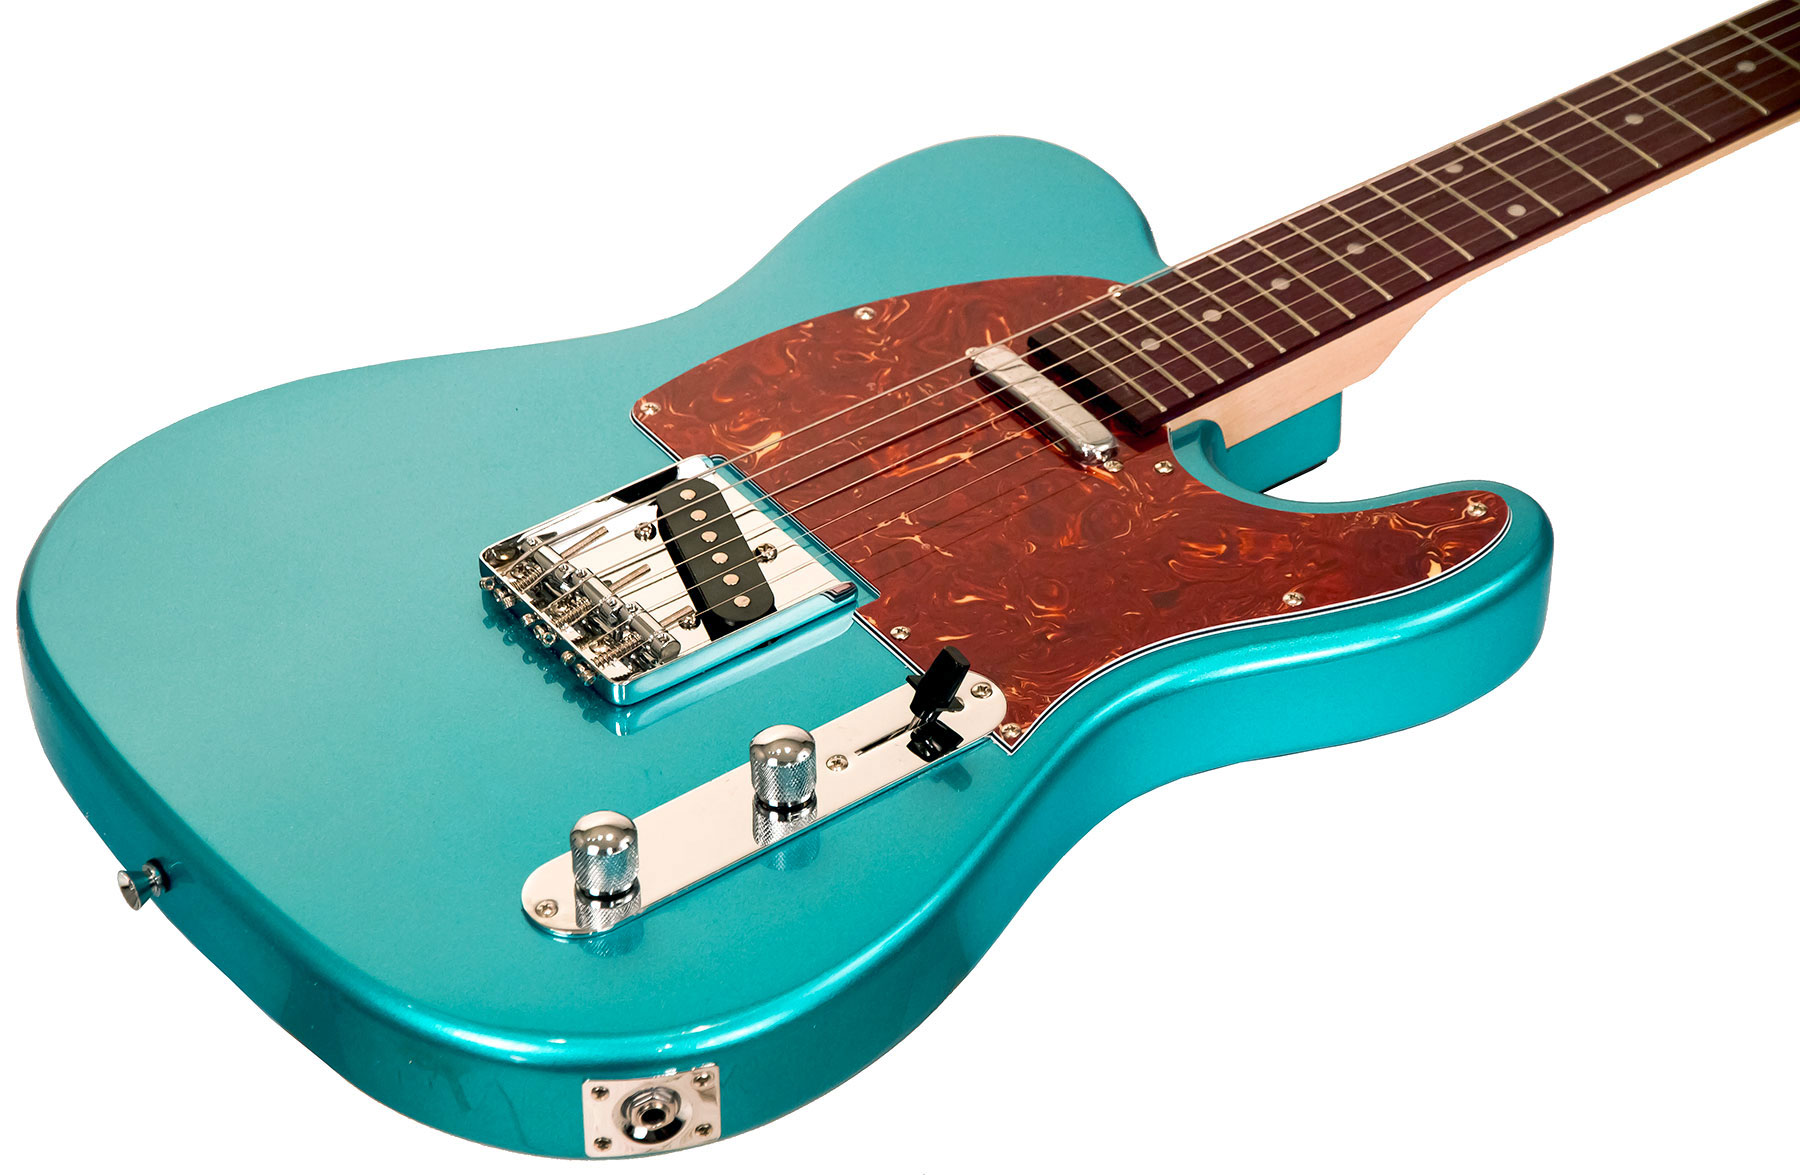 Eastone Tl70 +marshall Mg10 +housse +courroie +cable +mediators - Metallic Light Blue - Electric guitar set - Variation 1